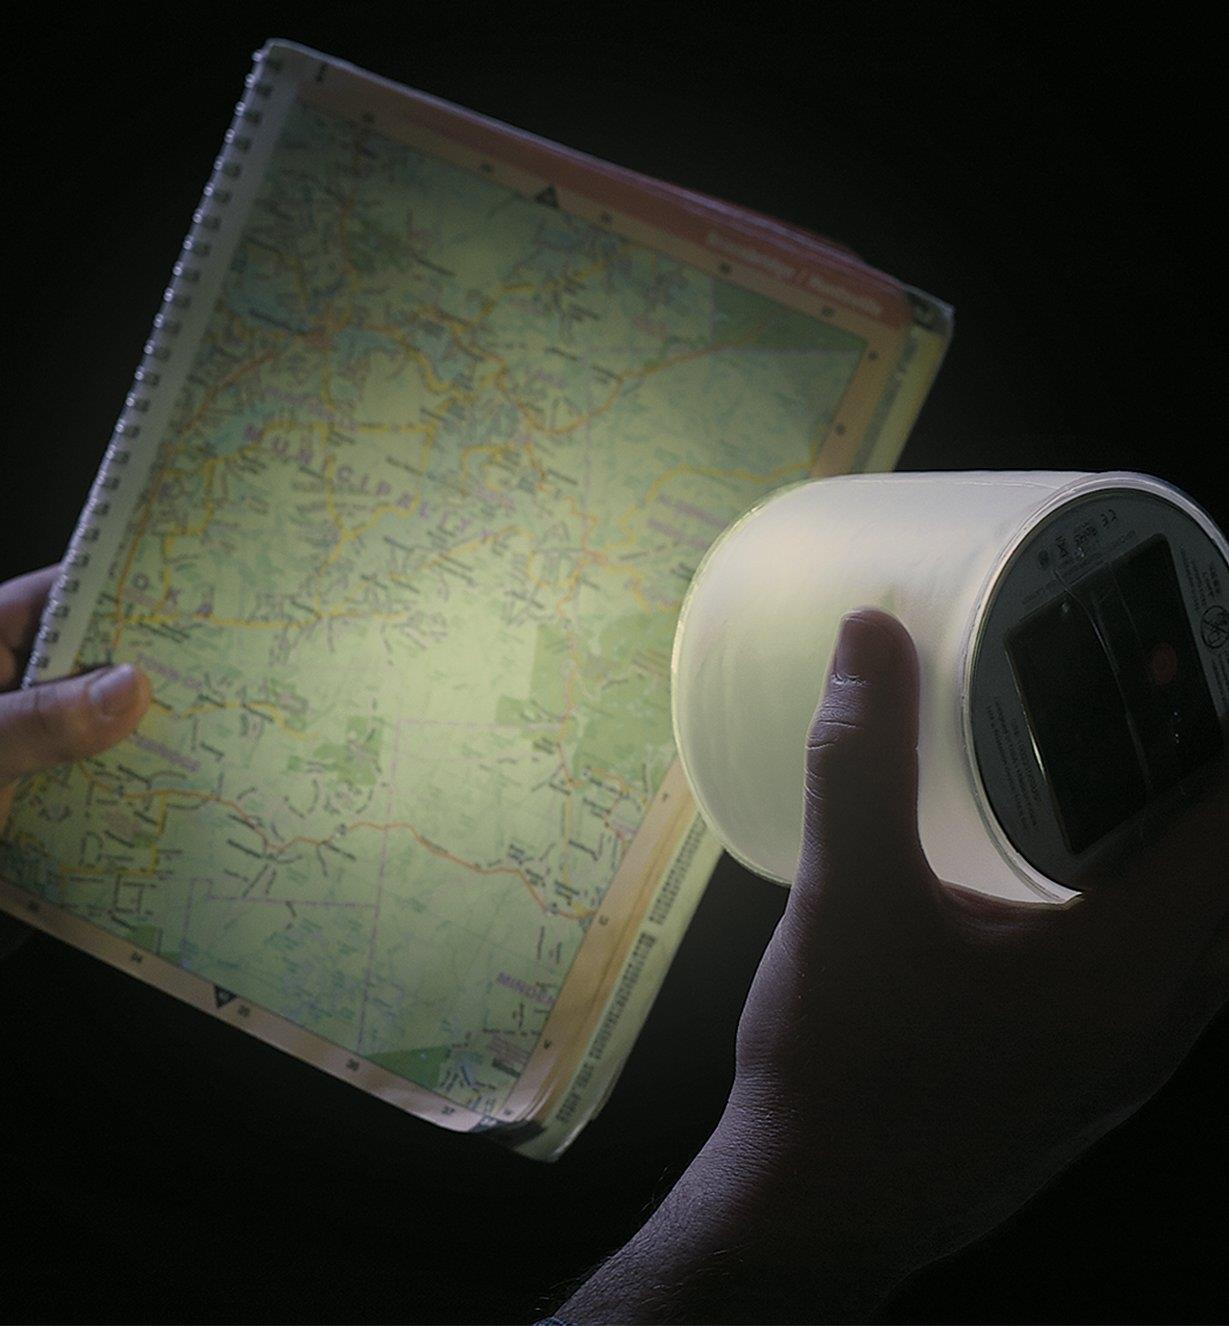 Using the Emergency Luci Lantern to illuminate a map in the dark